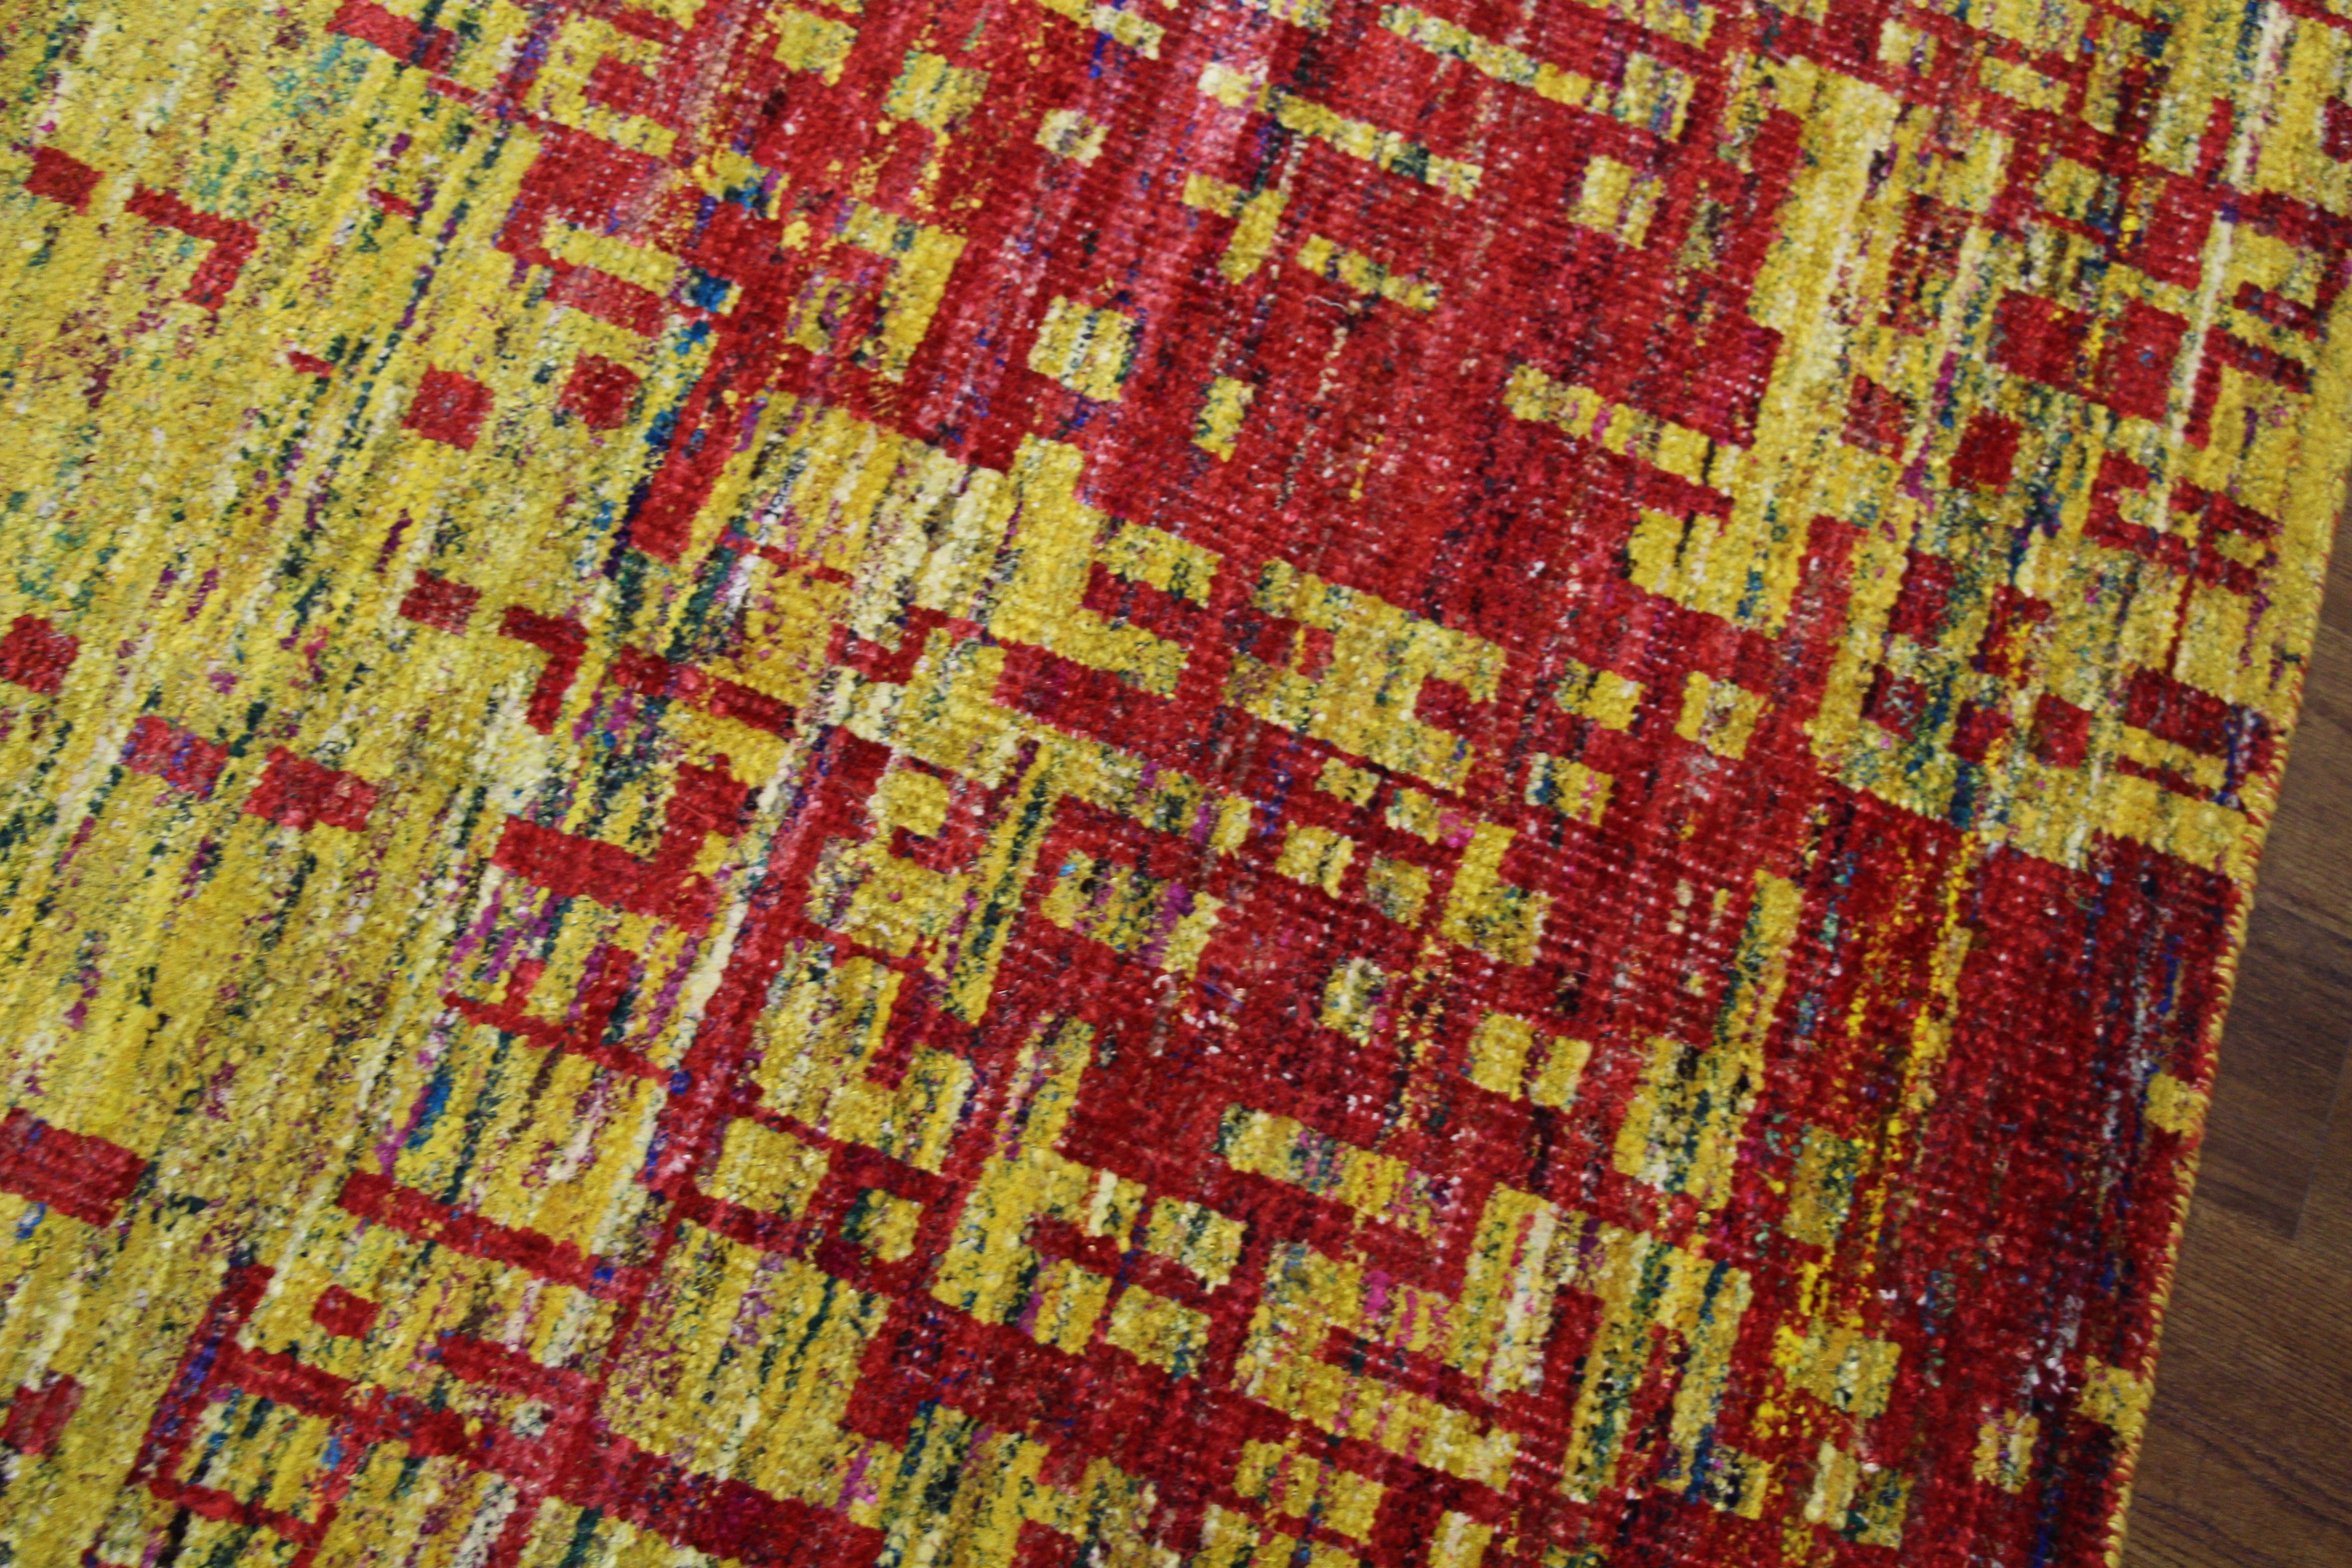 Yellow & Red Indian Sari Art Silk 6x8 One Of a Kind Rug 2860 - west of hudson